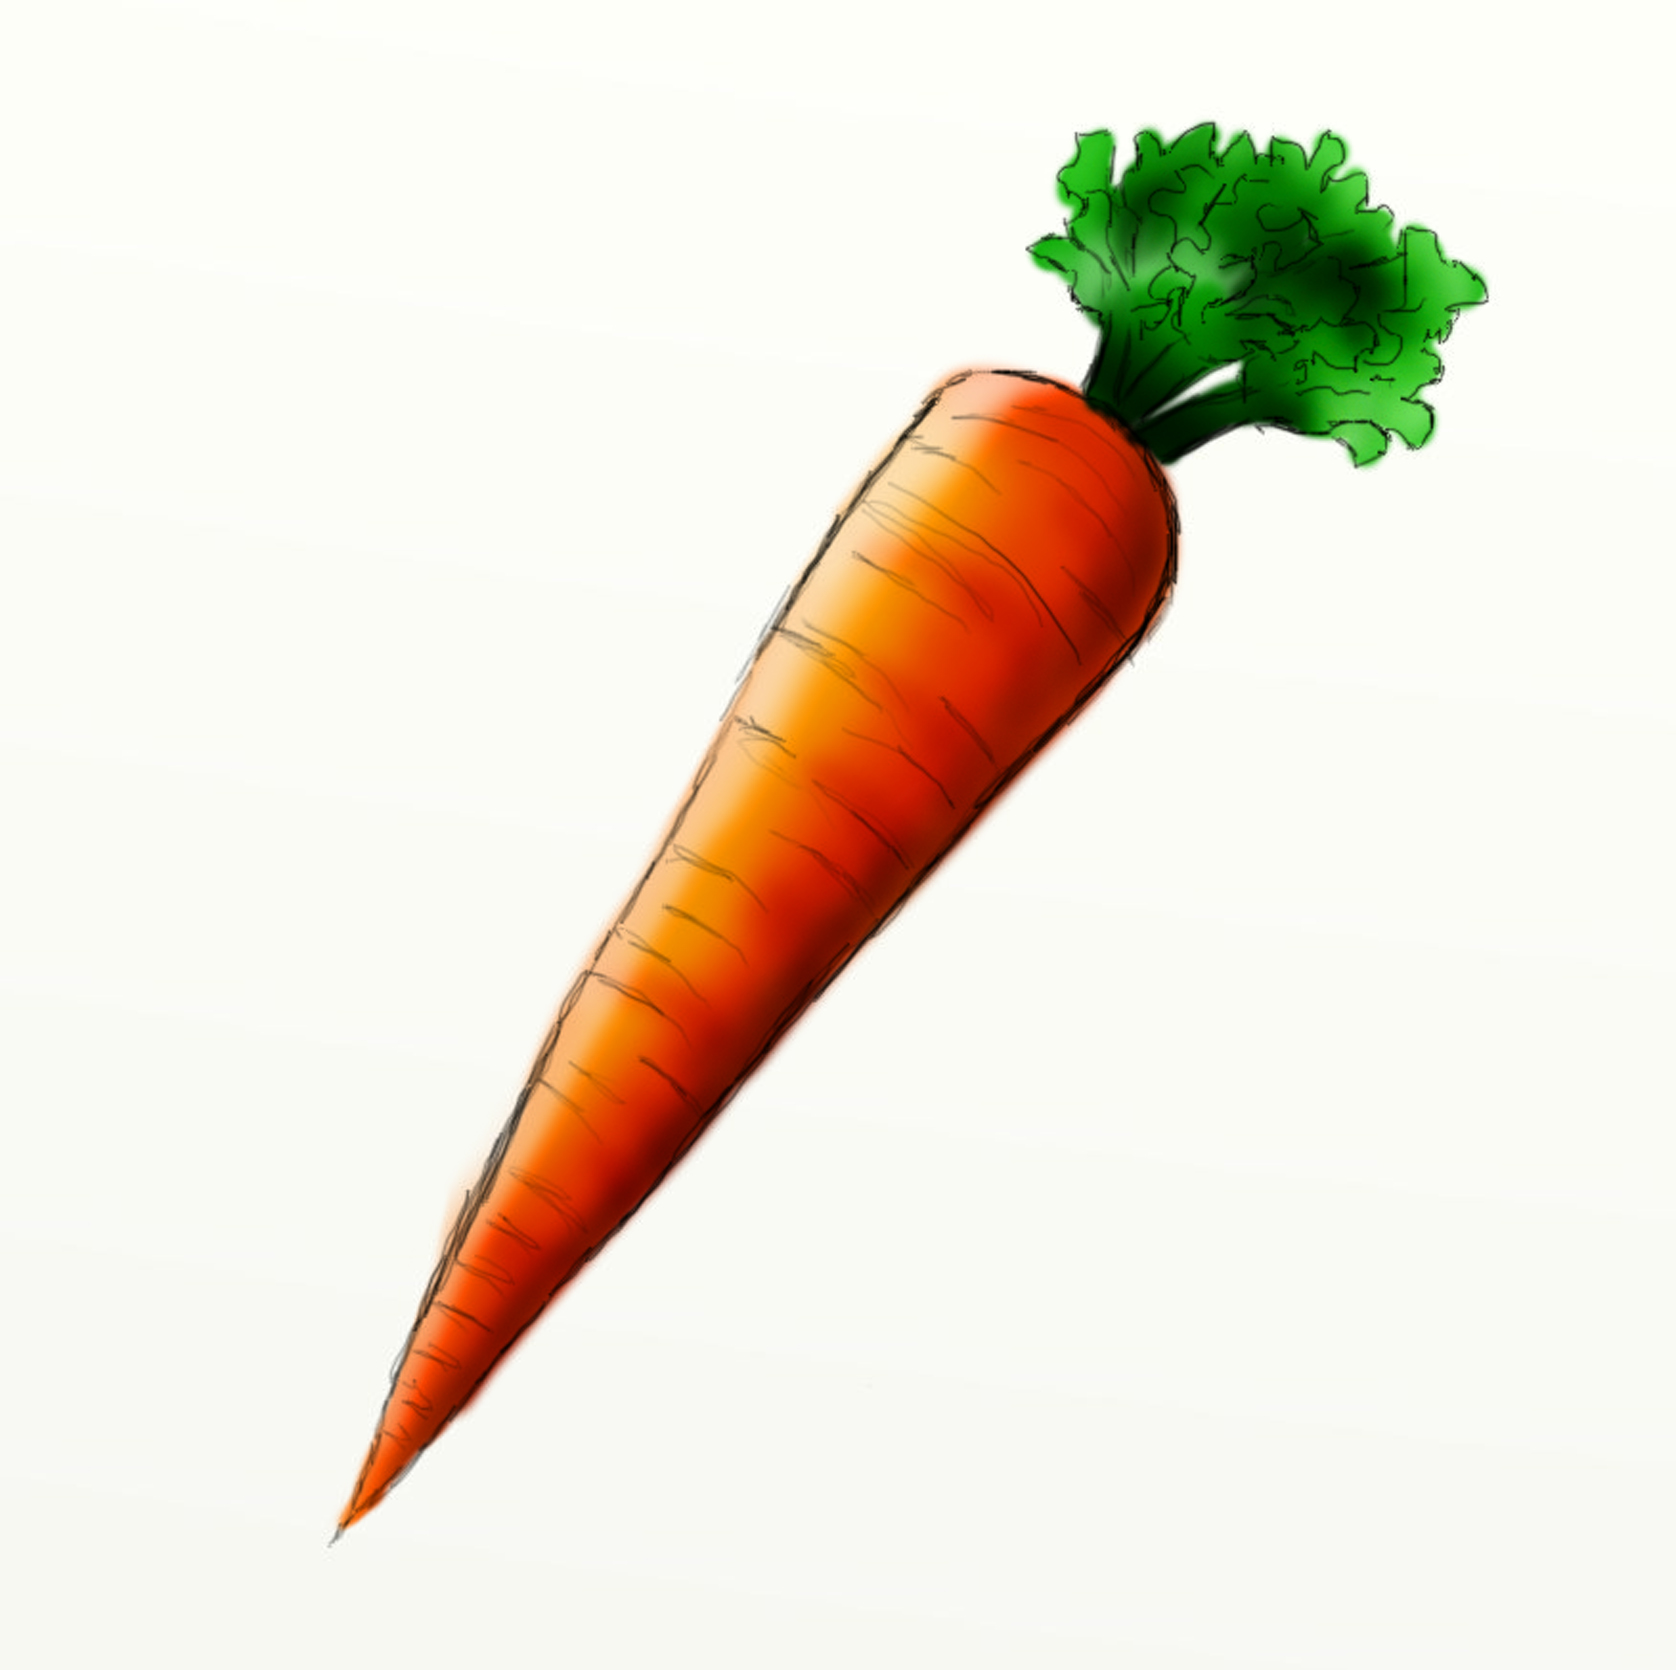 Picture Of Carrot 